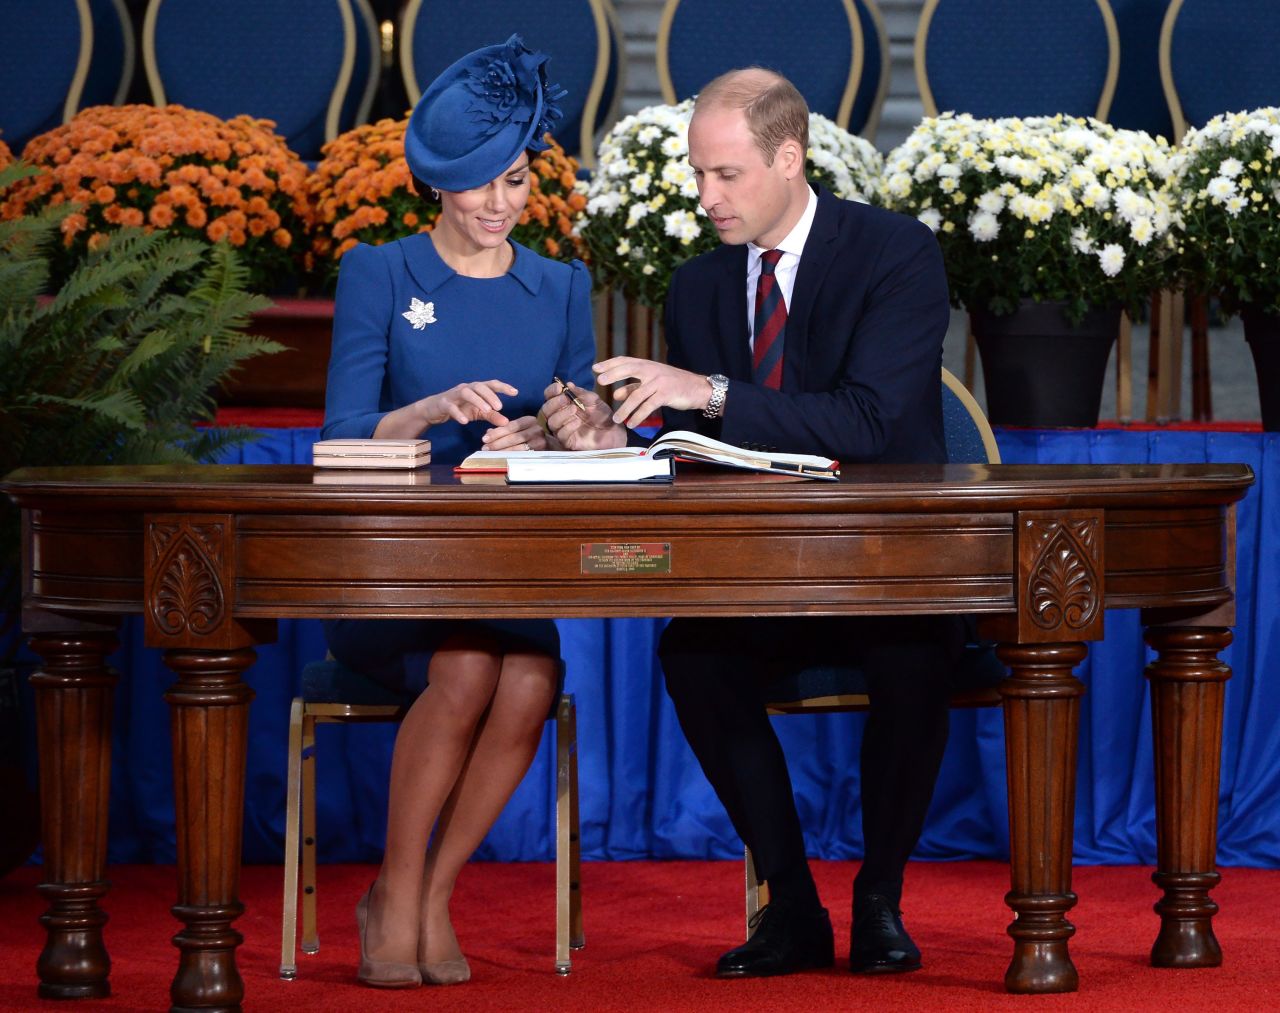 The royals sign the Canadian government's Golden Book at the Legislative Assembly in Victoria on September 24. 